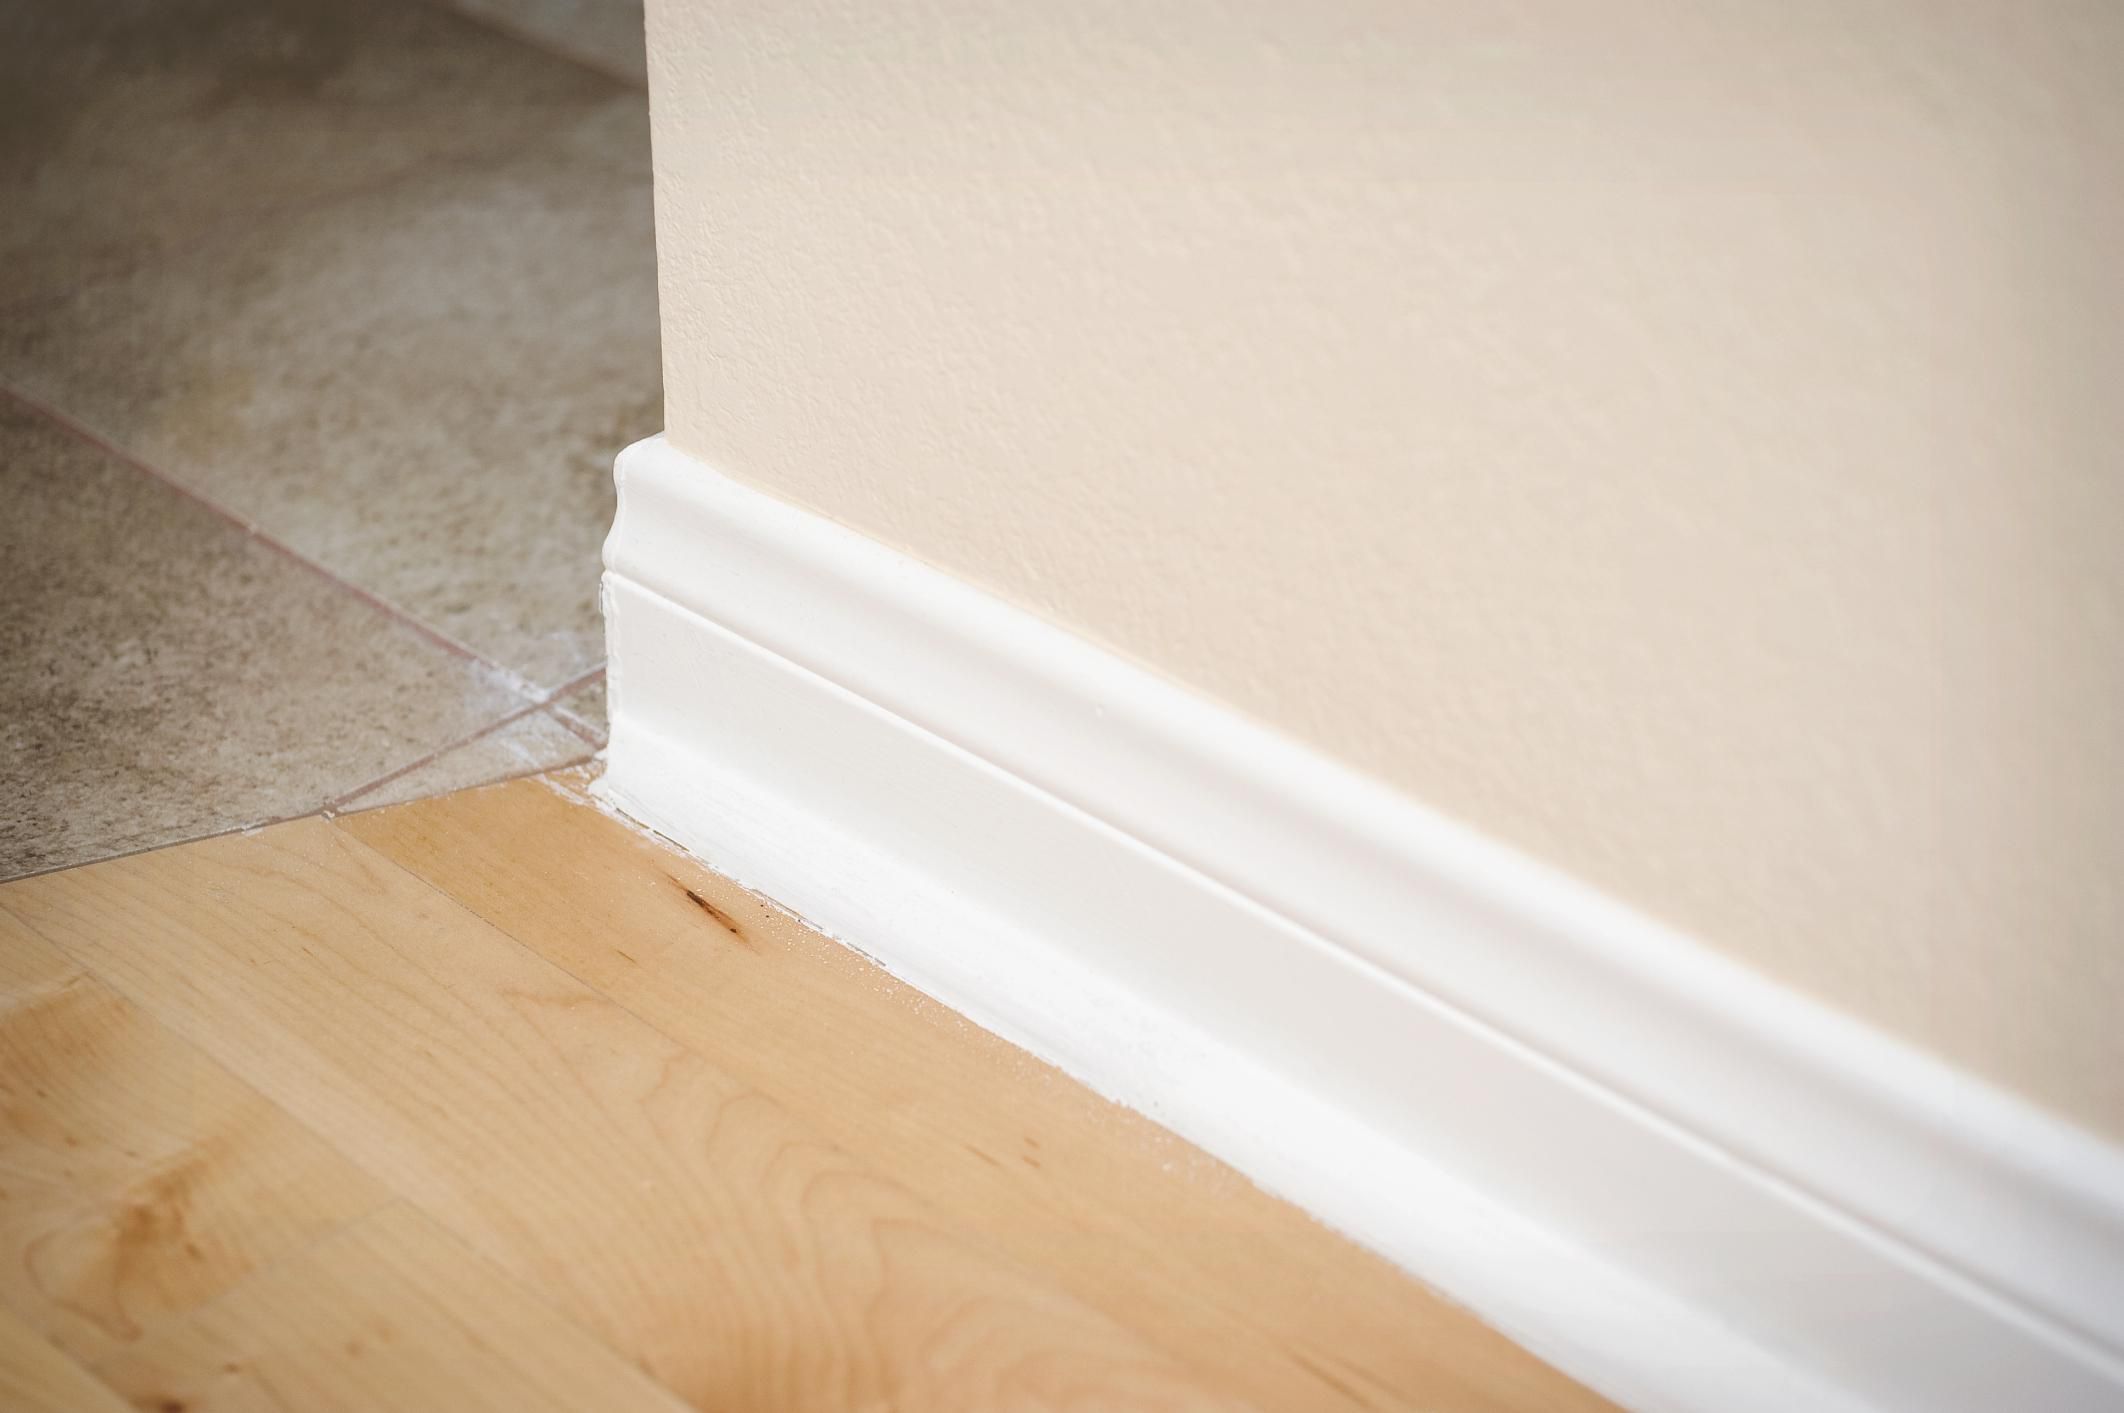 Can you use a roller to paint baseboards?